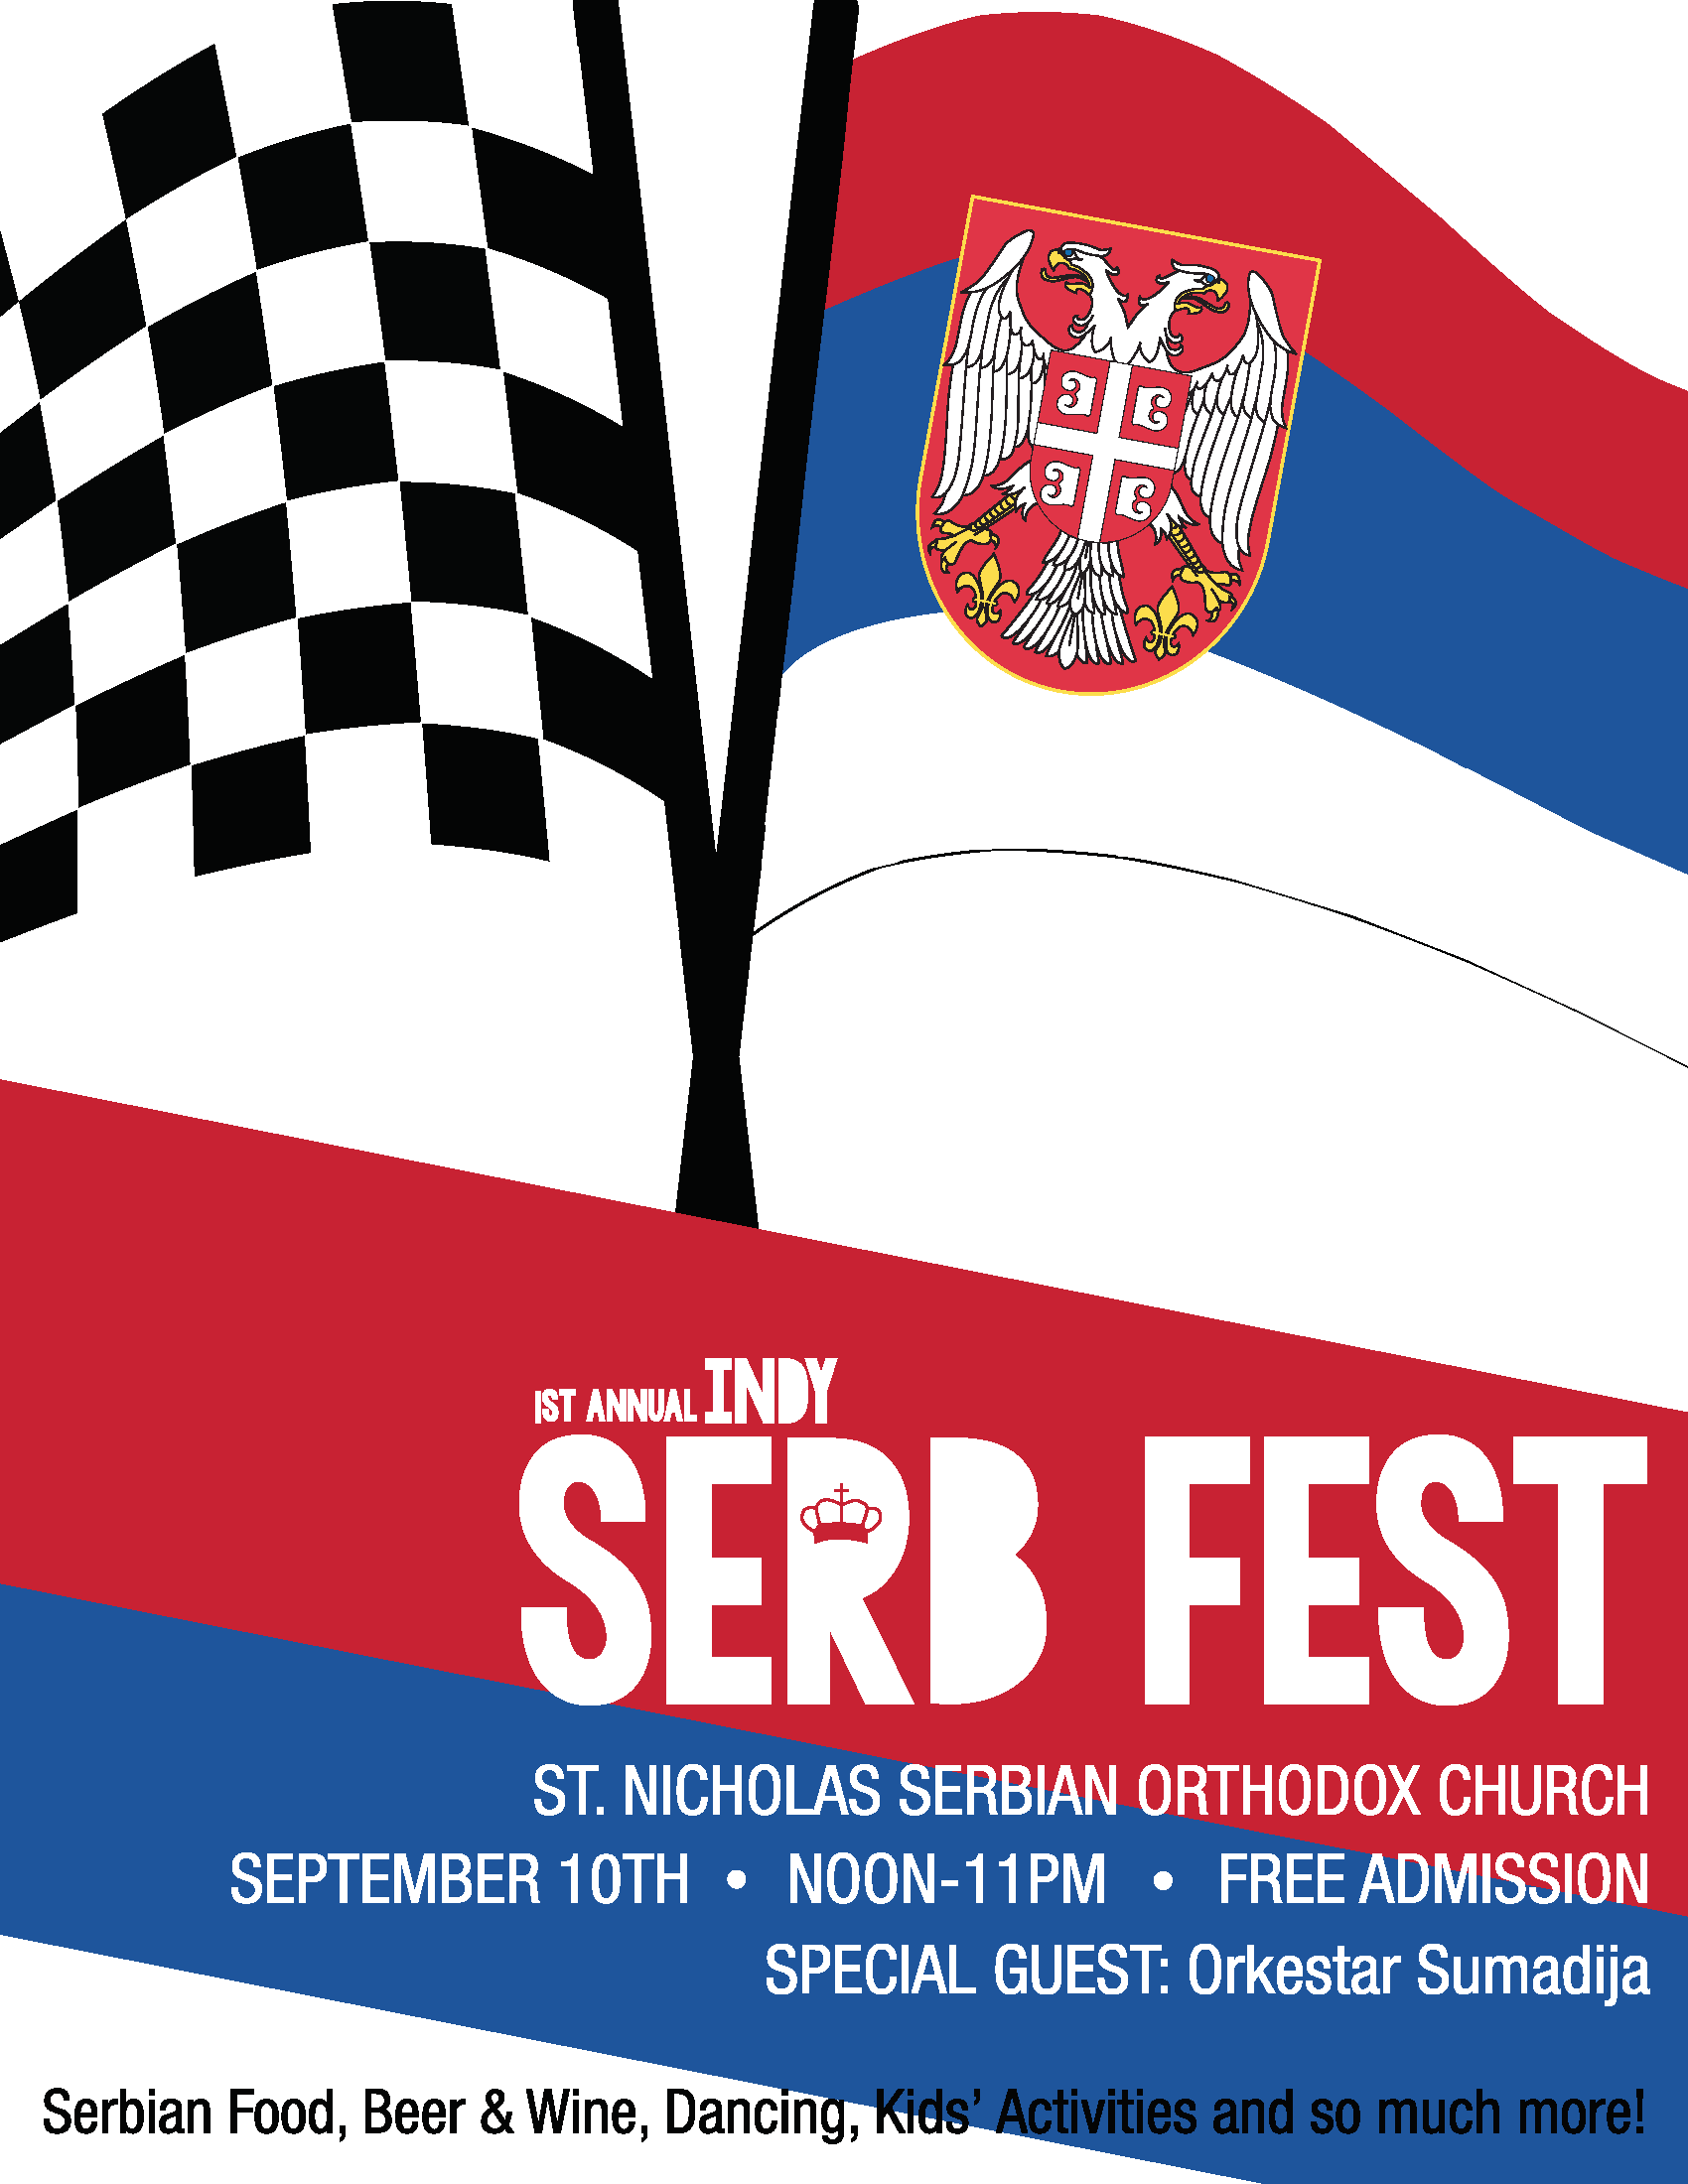 First Annual Indy Serb Fest takes place September 10th